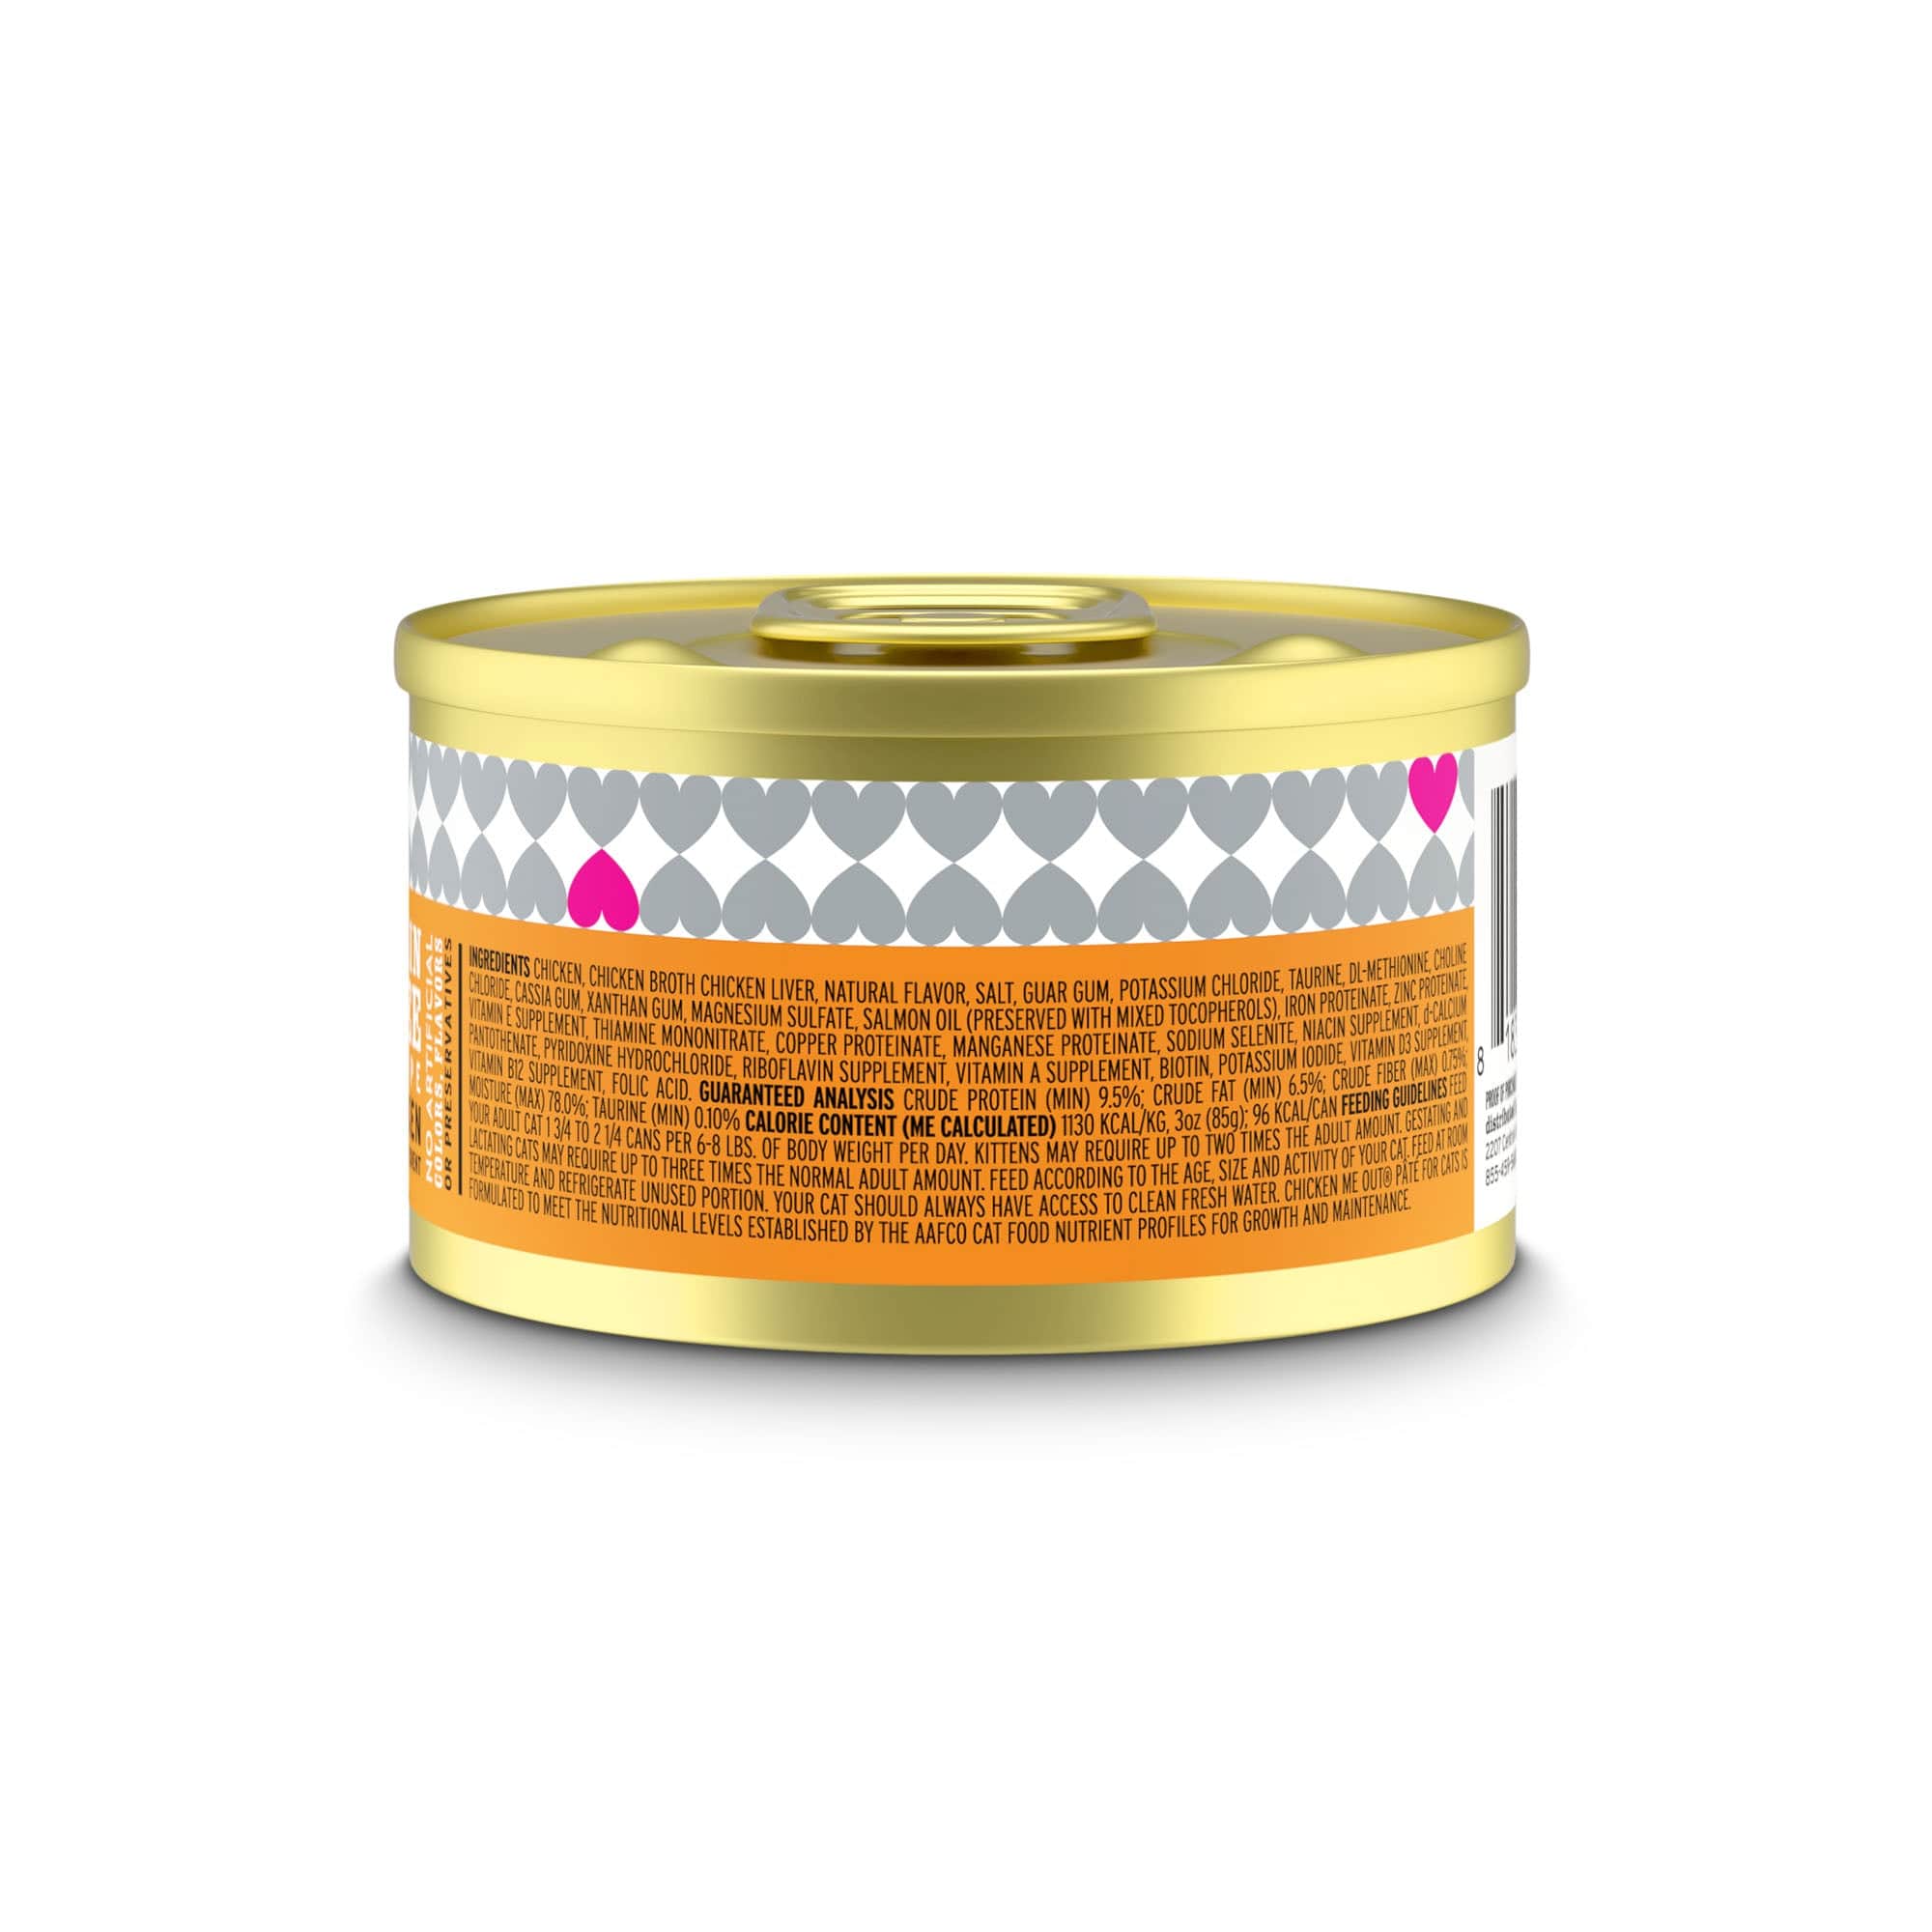 A can of cat food labeled Original Recipe - Chicken Me Out Pâté, featuring a gold lid with heart designs, promising a gourmet chicken pâté experience for your feline friend.